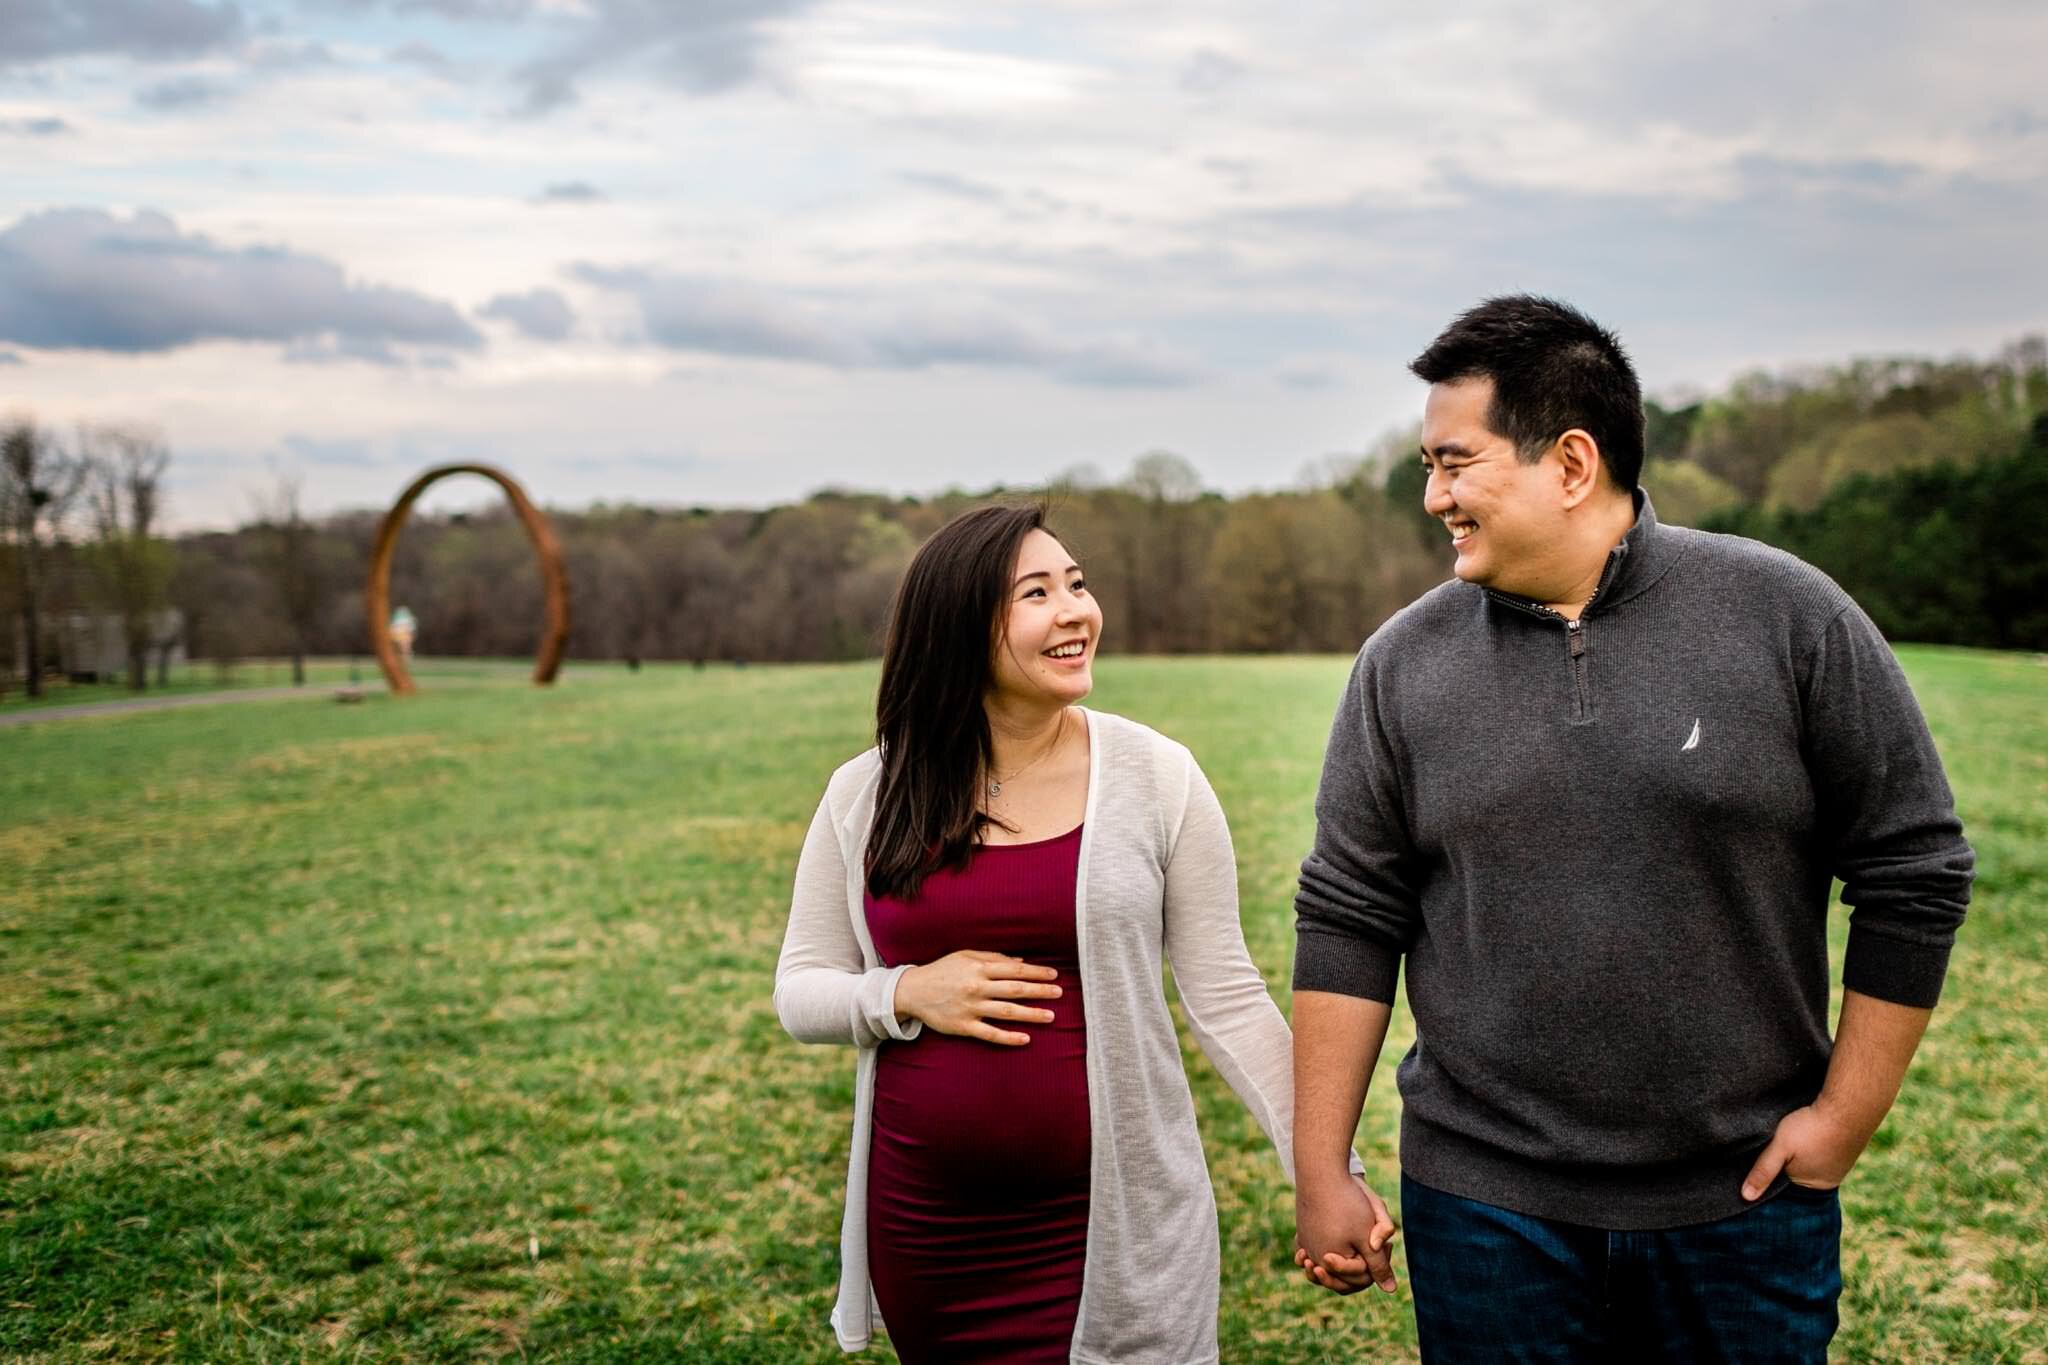 Raleigh Maternity Photographer | By G. Lin Photography | NC Museum of Art | Couple walking on open field